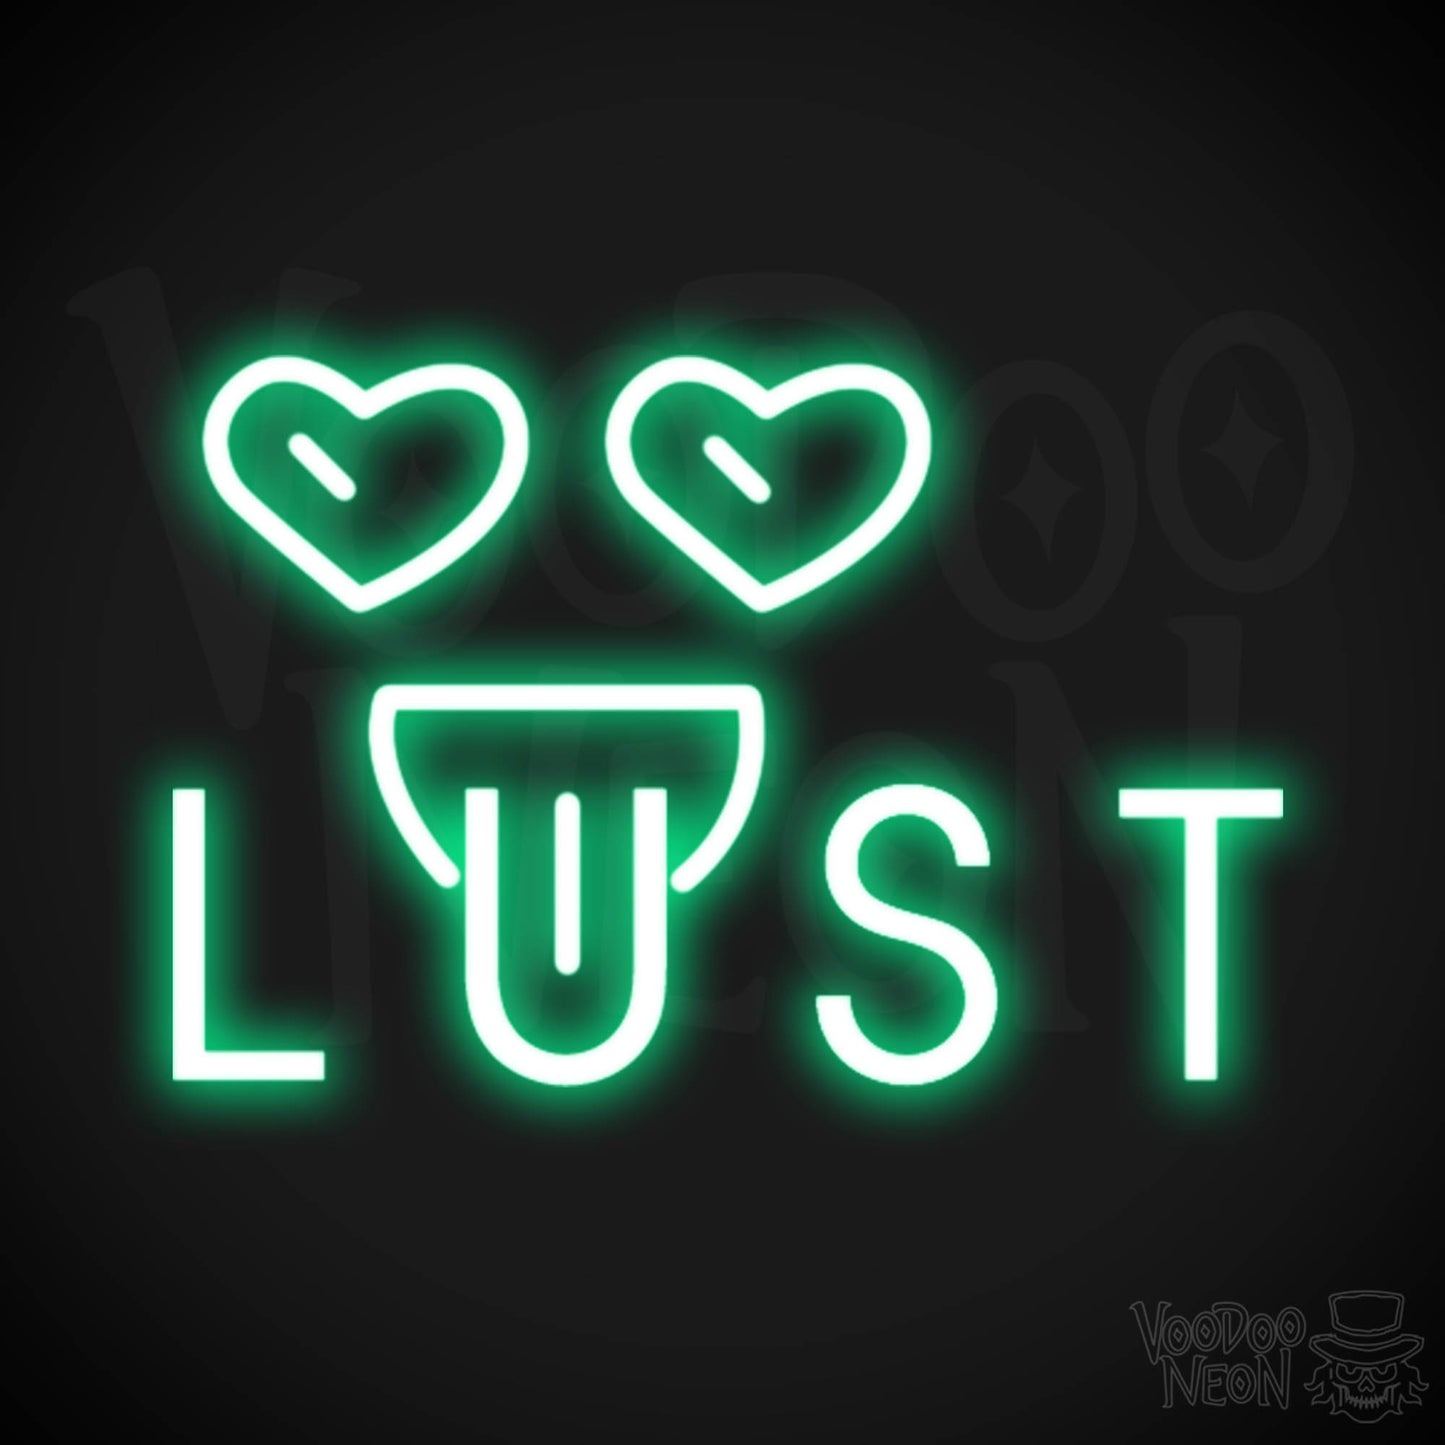 Lust Neon Sign - Neon Lust Sign - Color Green